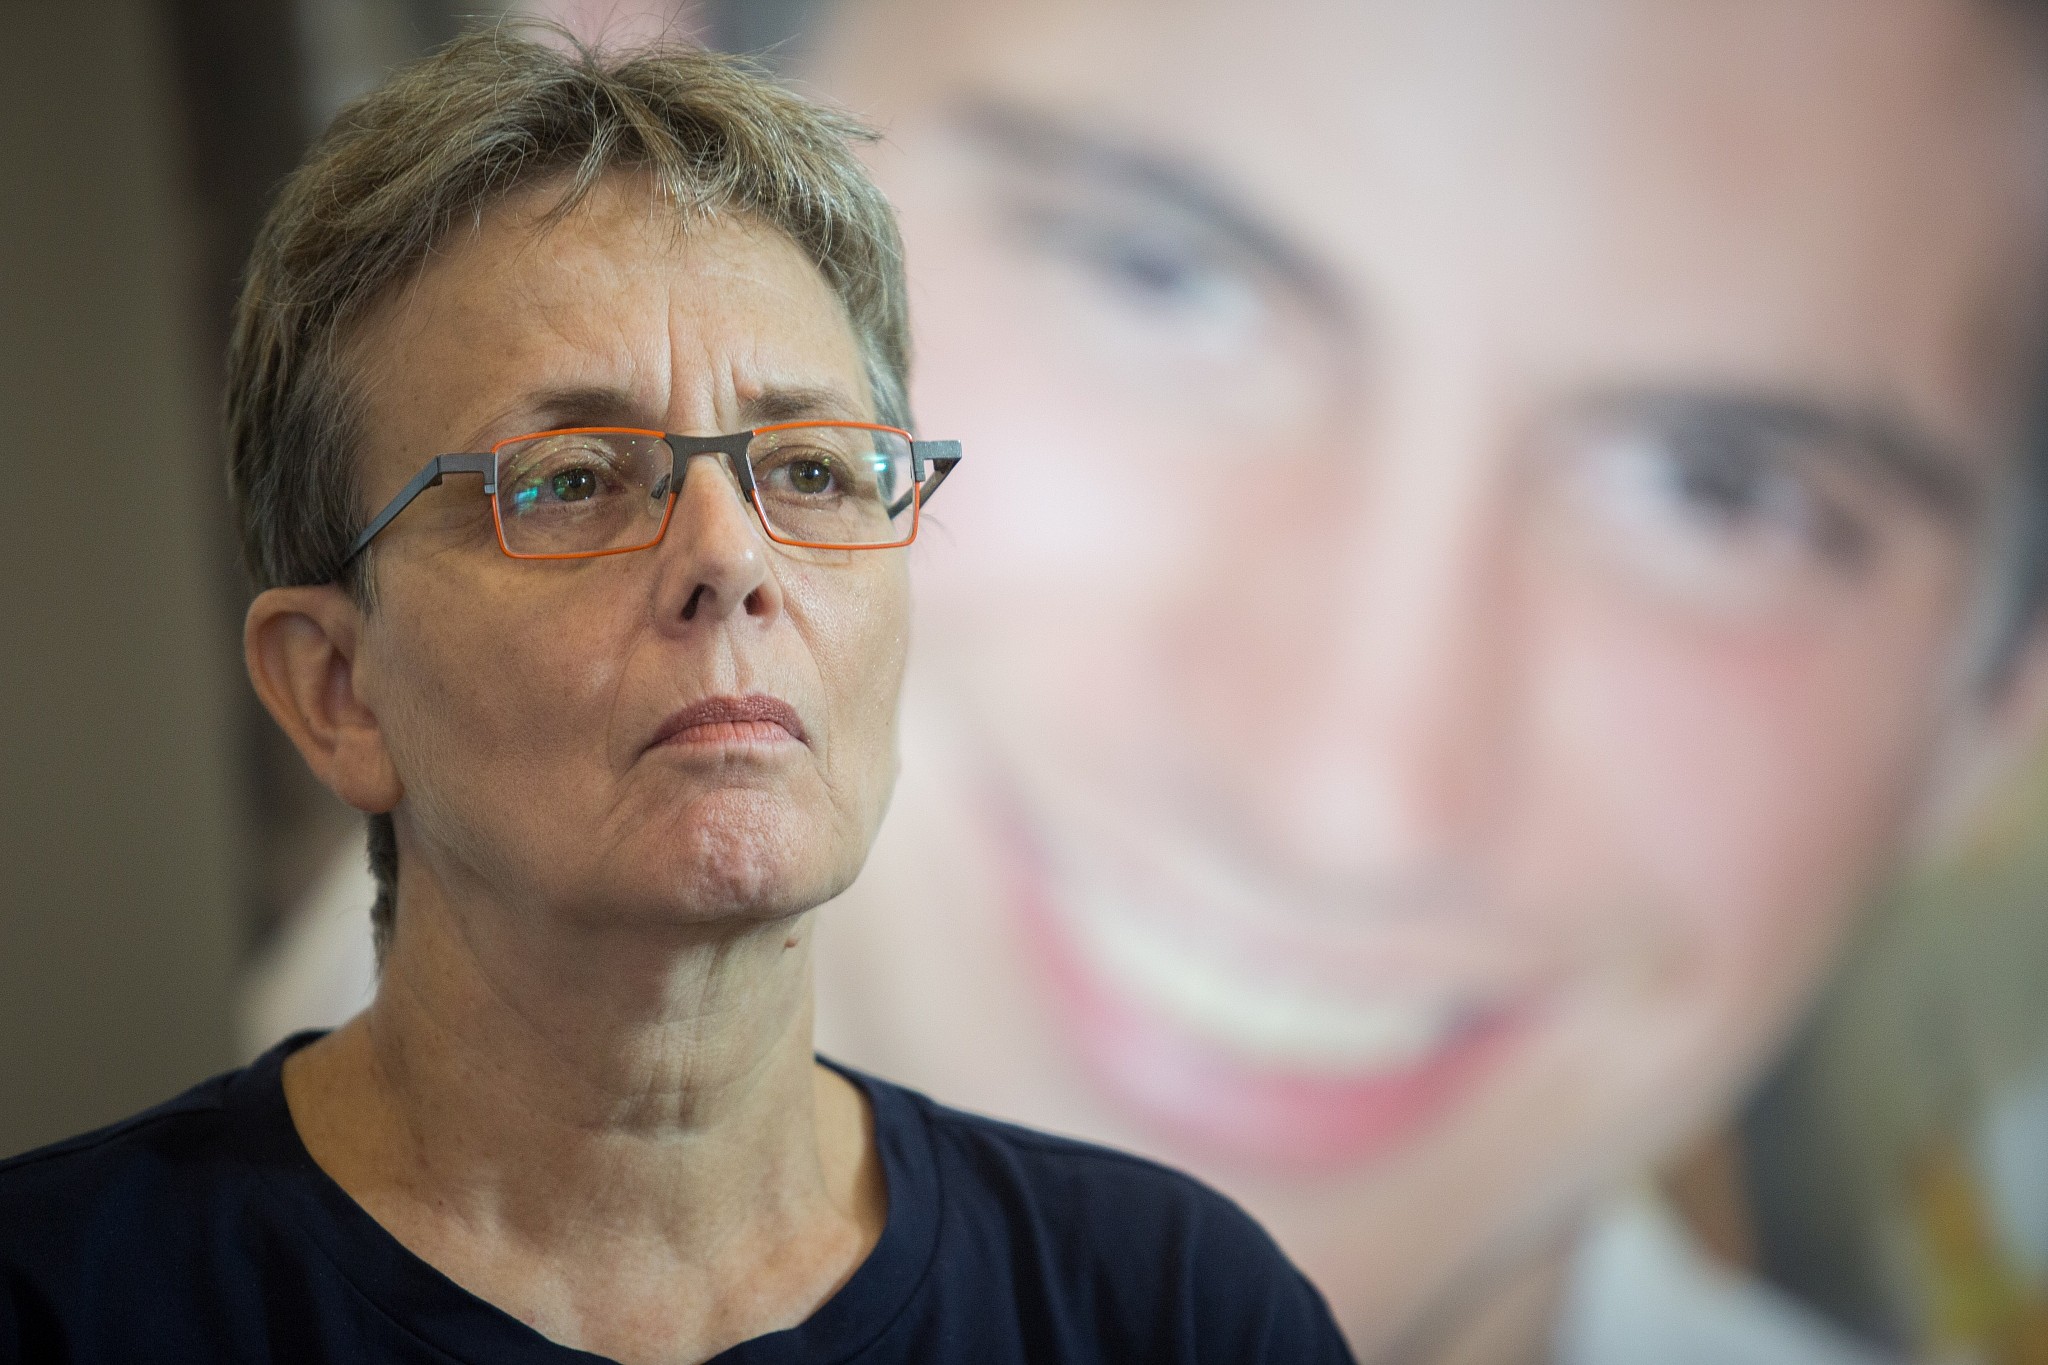 Leah Goldin, mother of late Israeli soldier Hadar Goldin, attends a press conference, August 5, 2018. (Hadas Parush/Flash90)